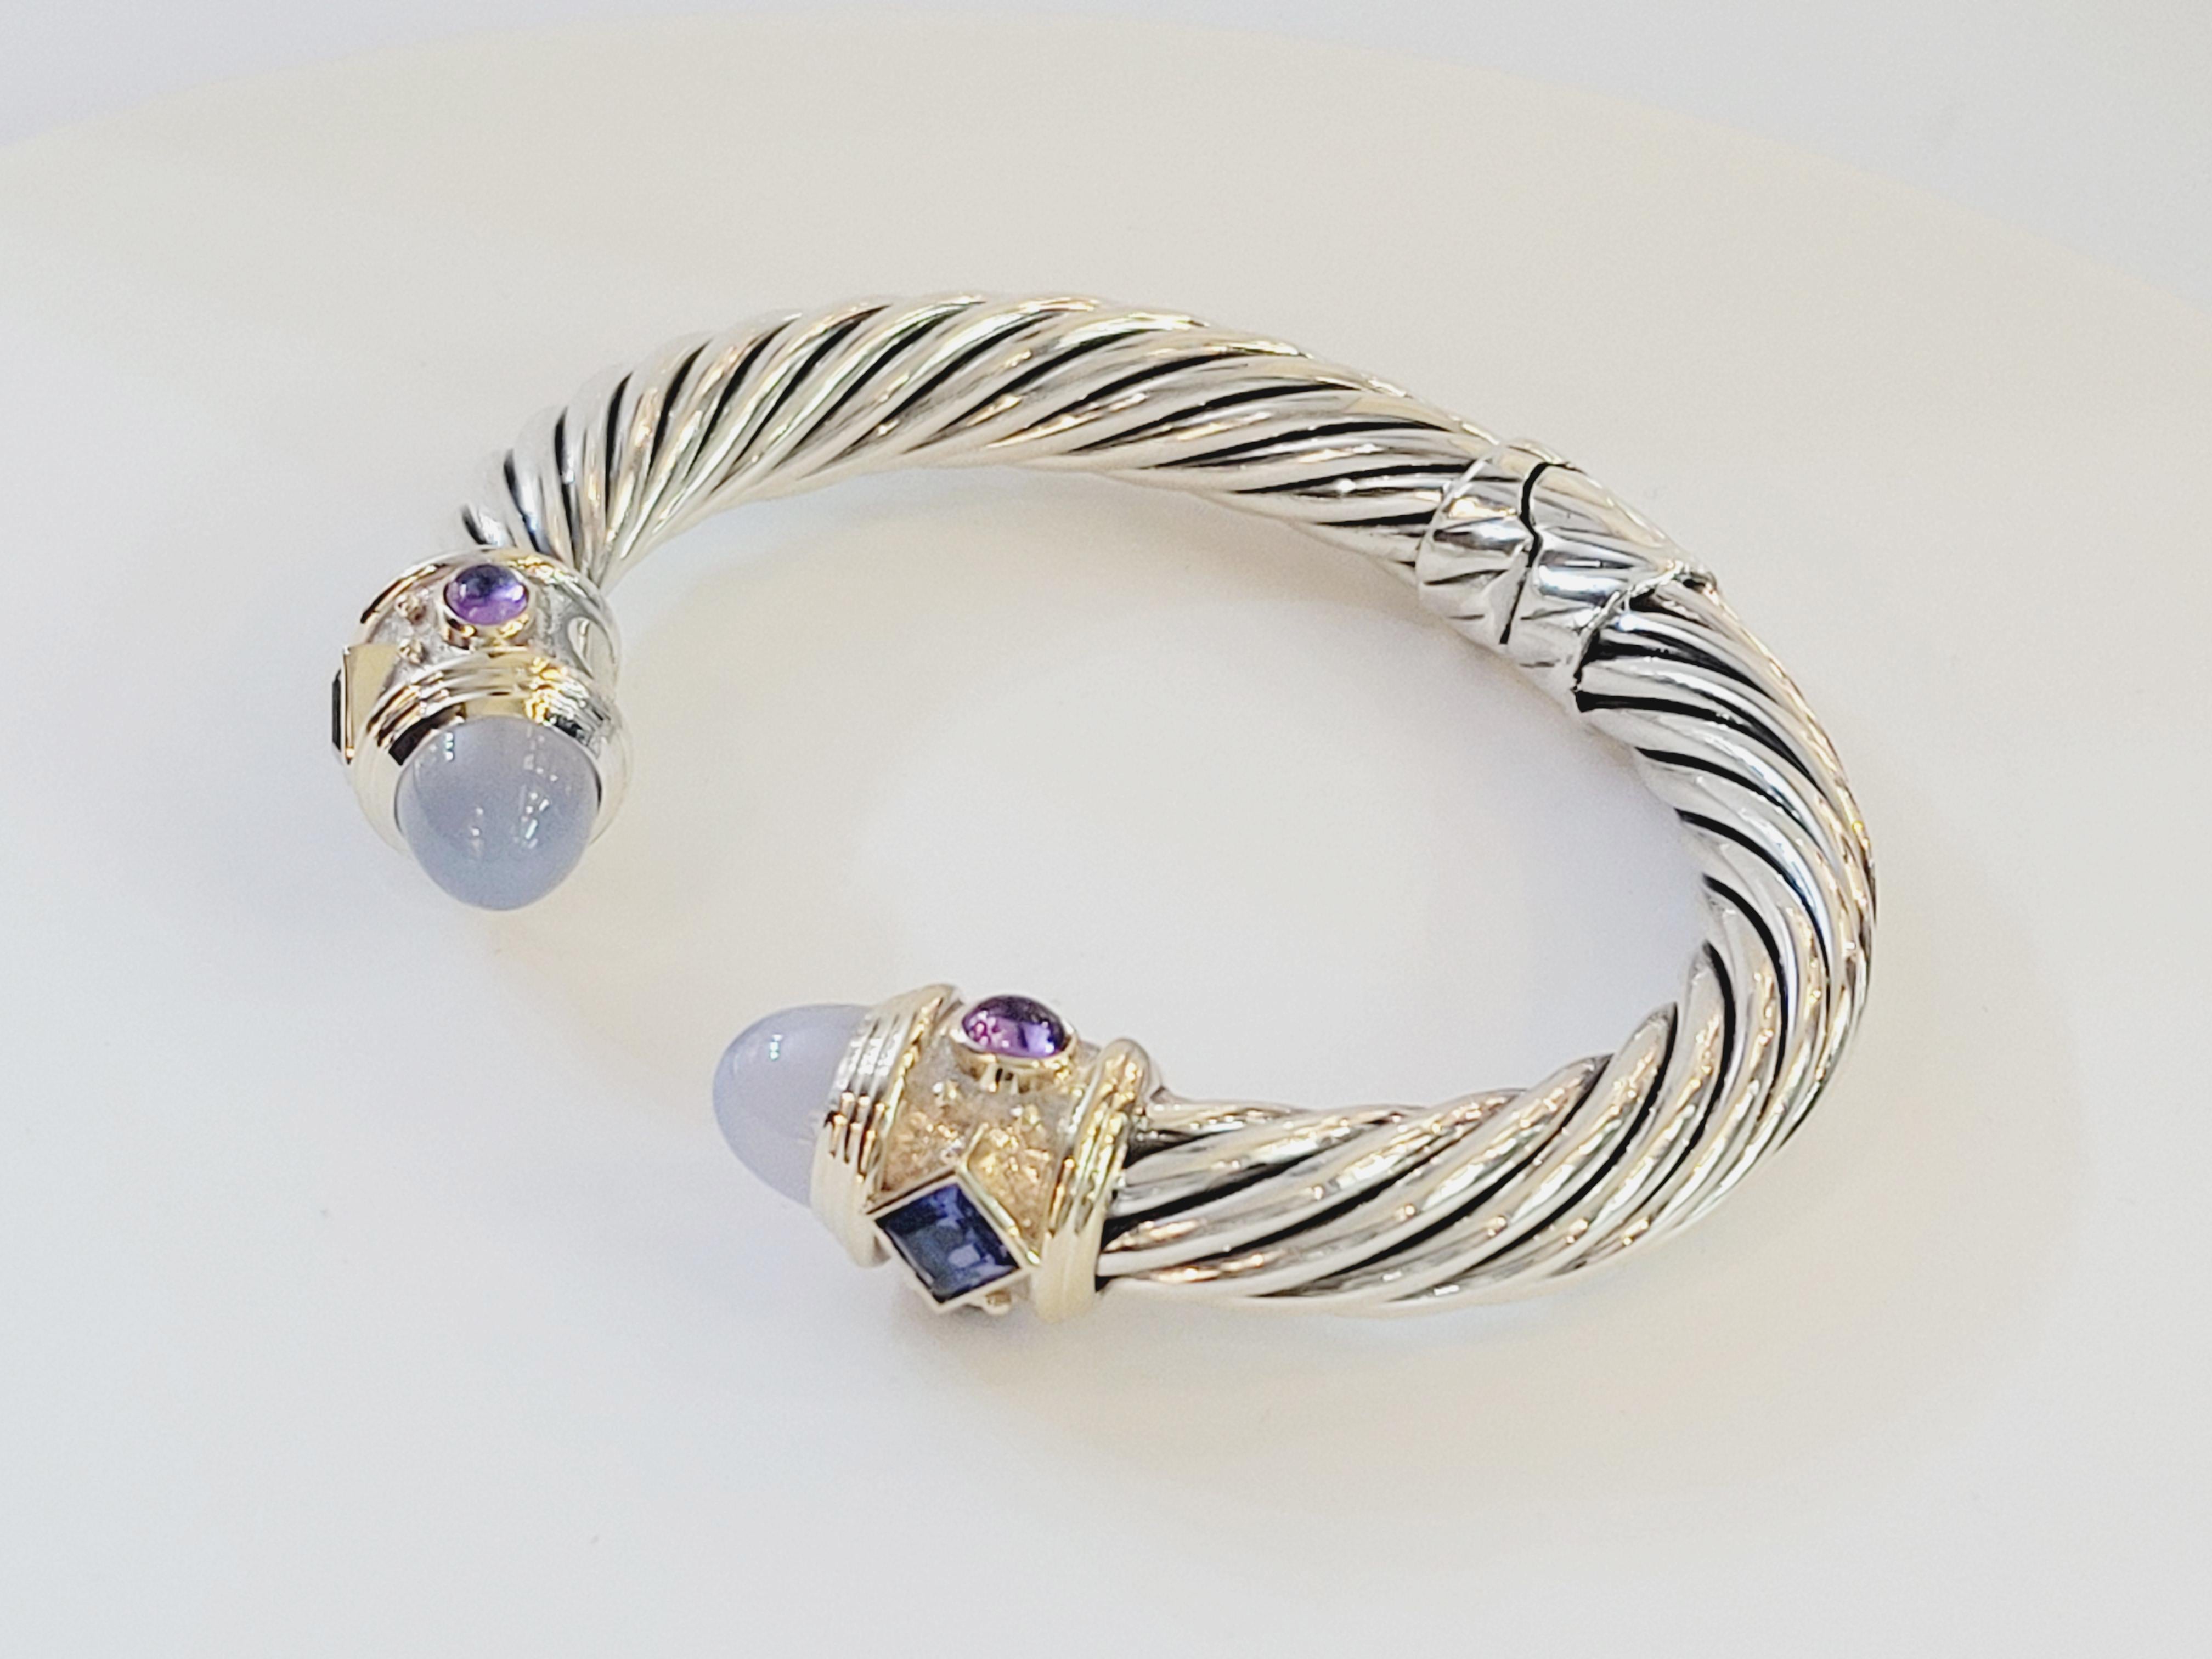 Renaissance bracelet 10mm sterling silver with blue chalcedony In Excellent Condition For Sale In New York, NY